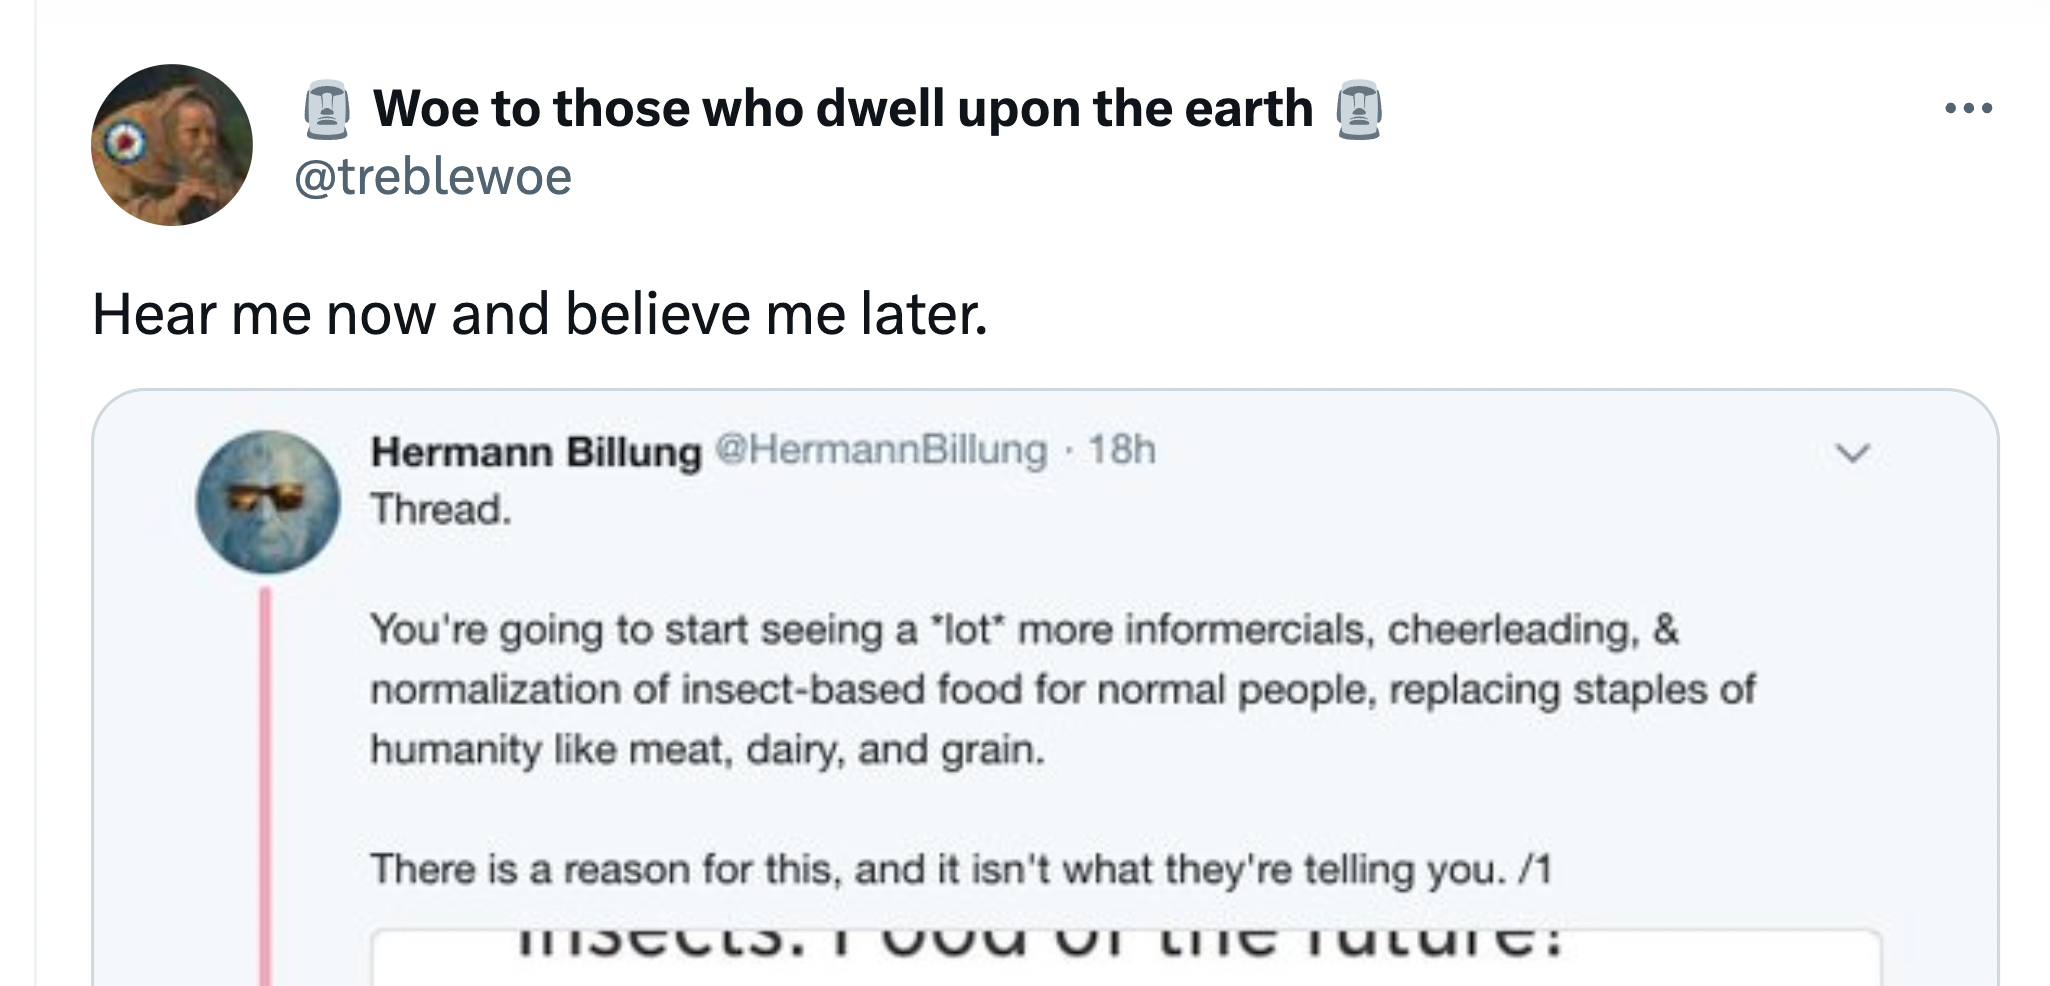 Woe on @treblewoe: Hear me now, believe me later. Screenshots account @hermannbillung's post, reading: "Thread. You're going to start seeing a lot more infomercials, cheerleading, and normalization of insect-based food for normal people, replacing staples of humanity like meat, dairy, and grain. There is a reason for this, and it isn't what they're telling you. /1